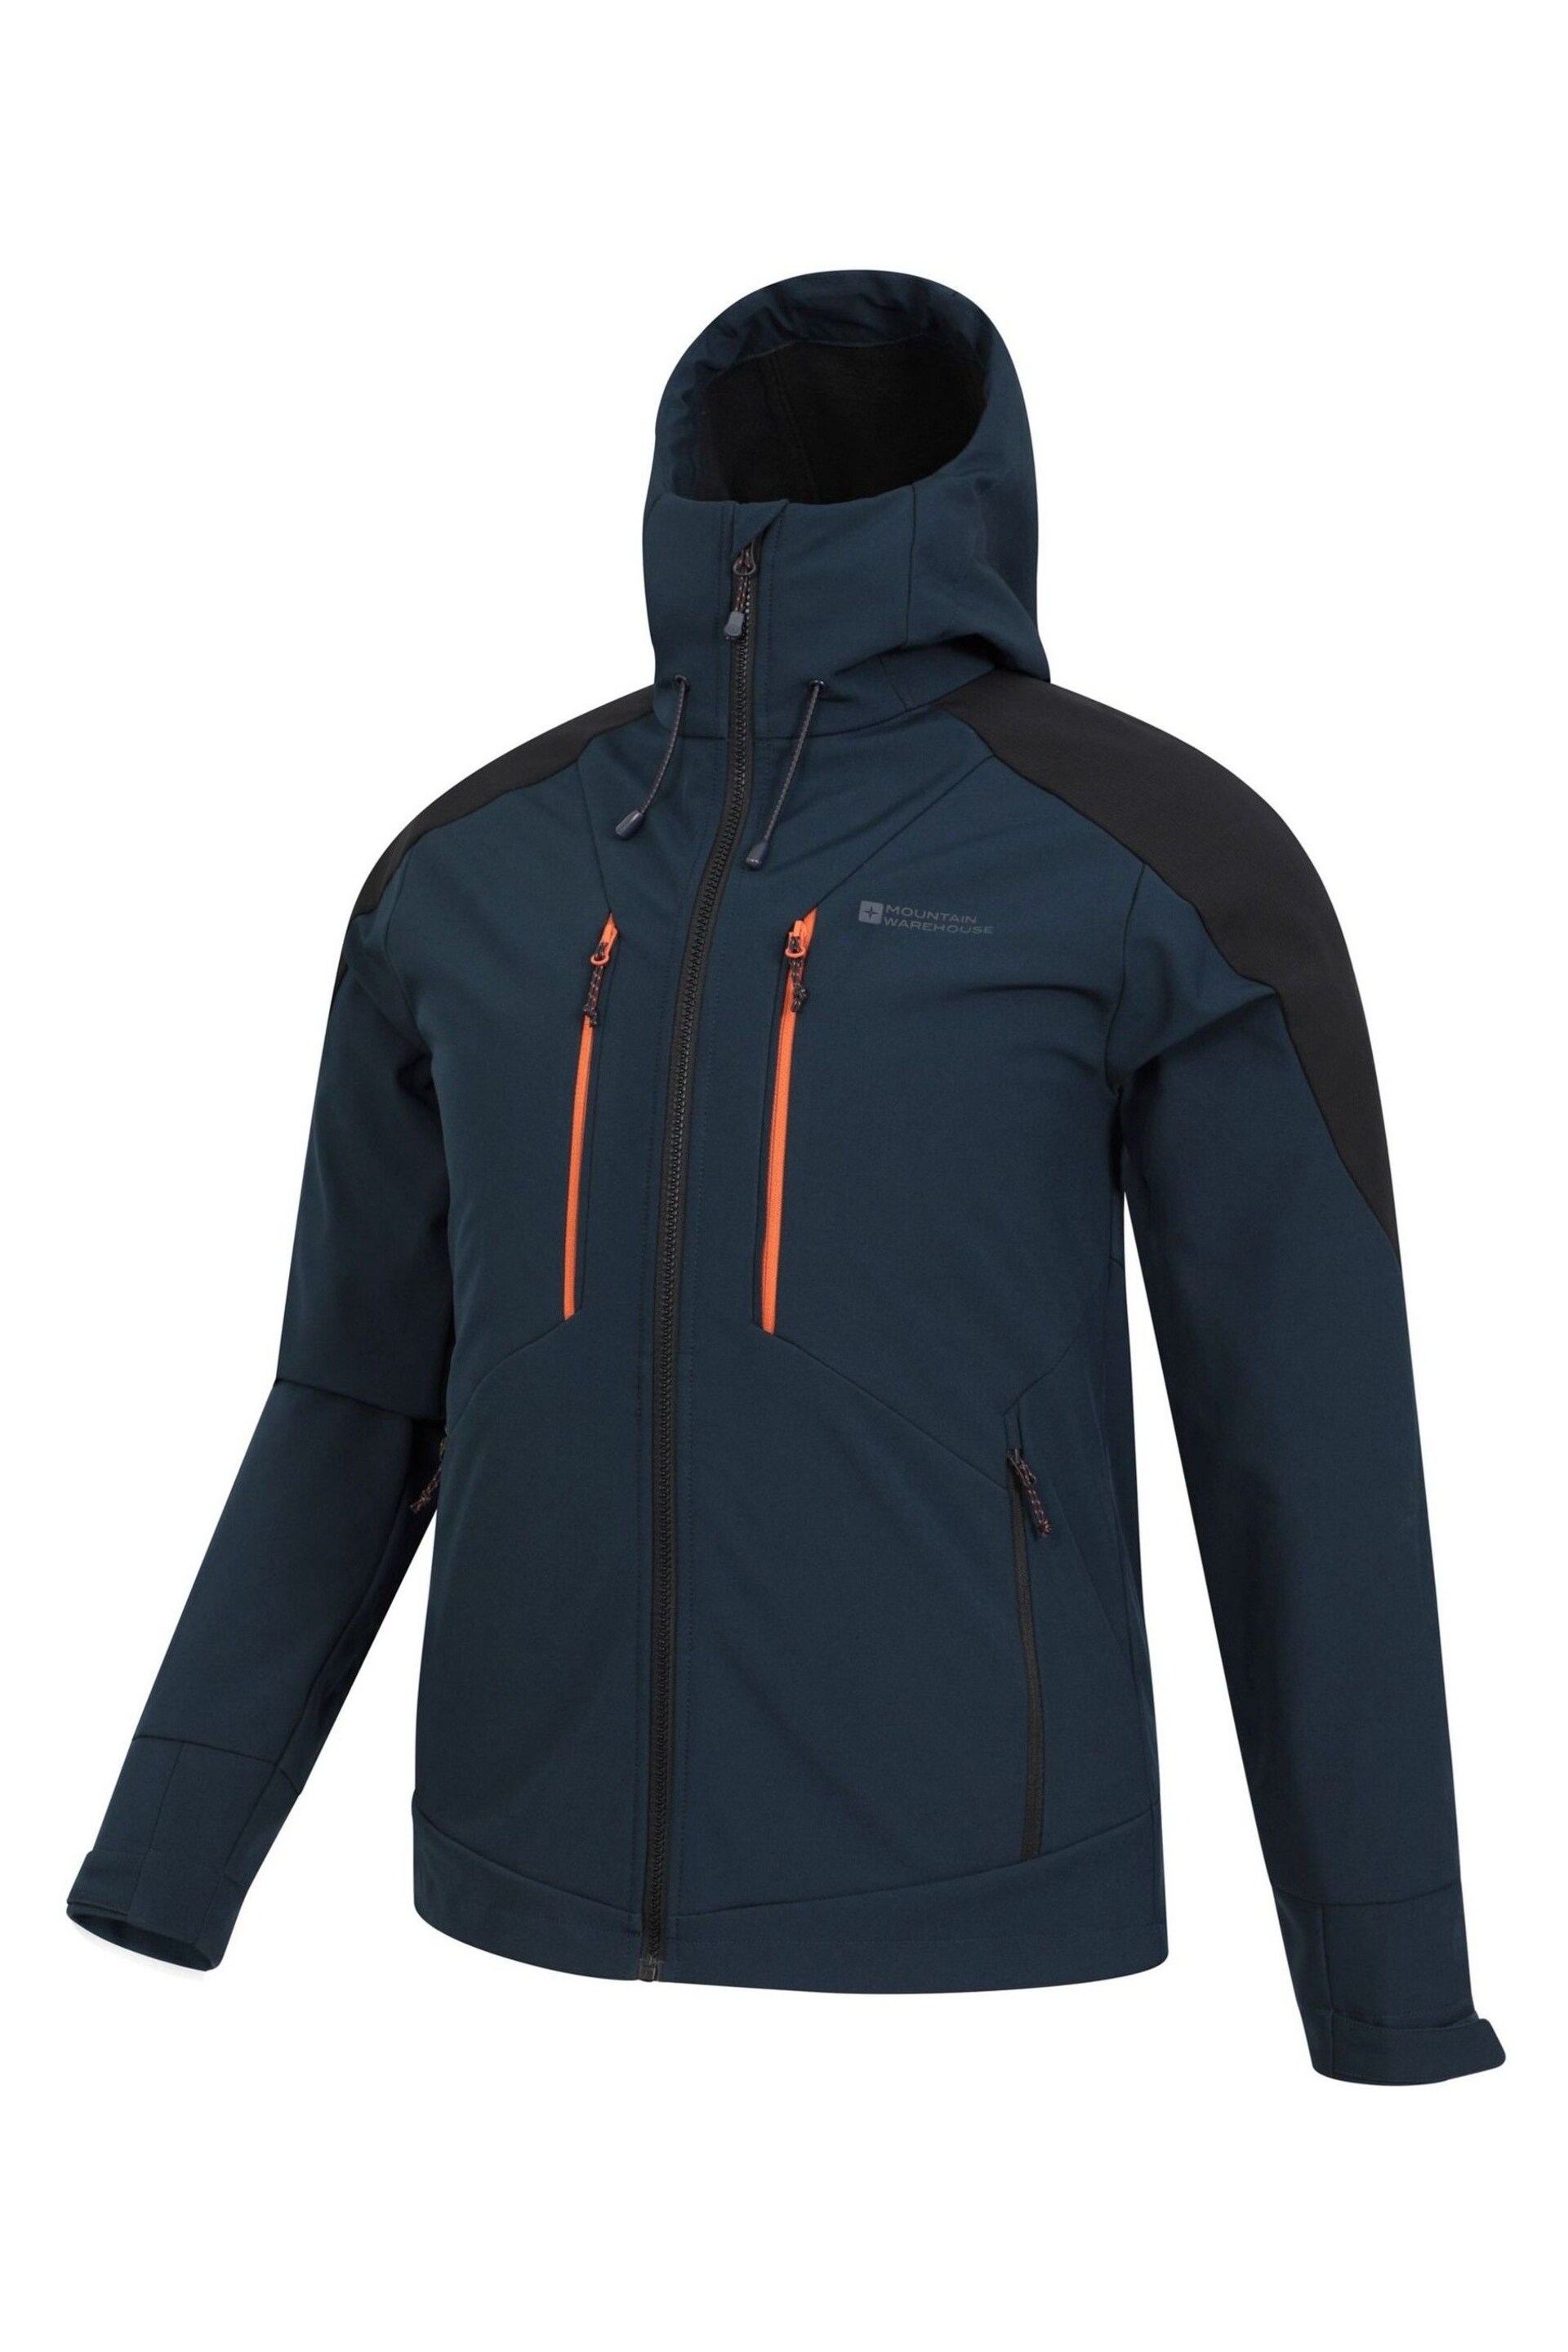 Mountain Warehouse Blue Navy Recycled Radius Water Resistant Softshell Jacket - Image 4 of 5